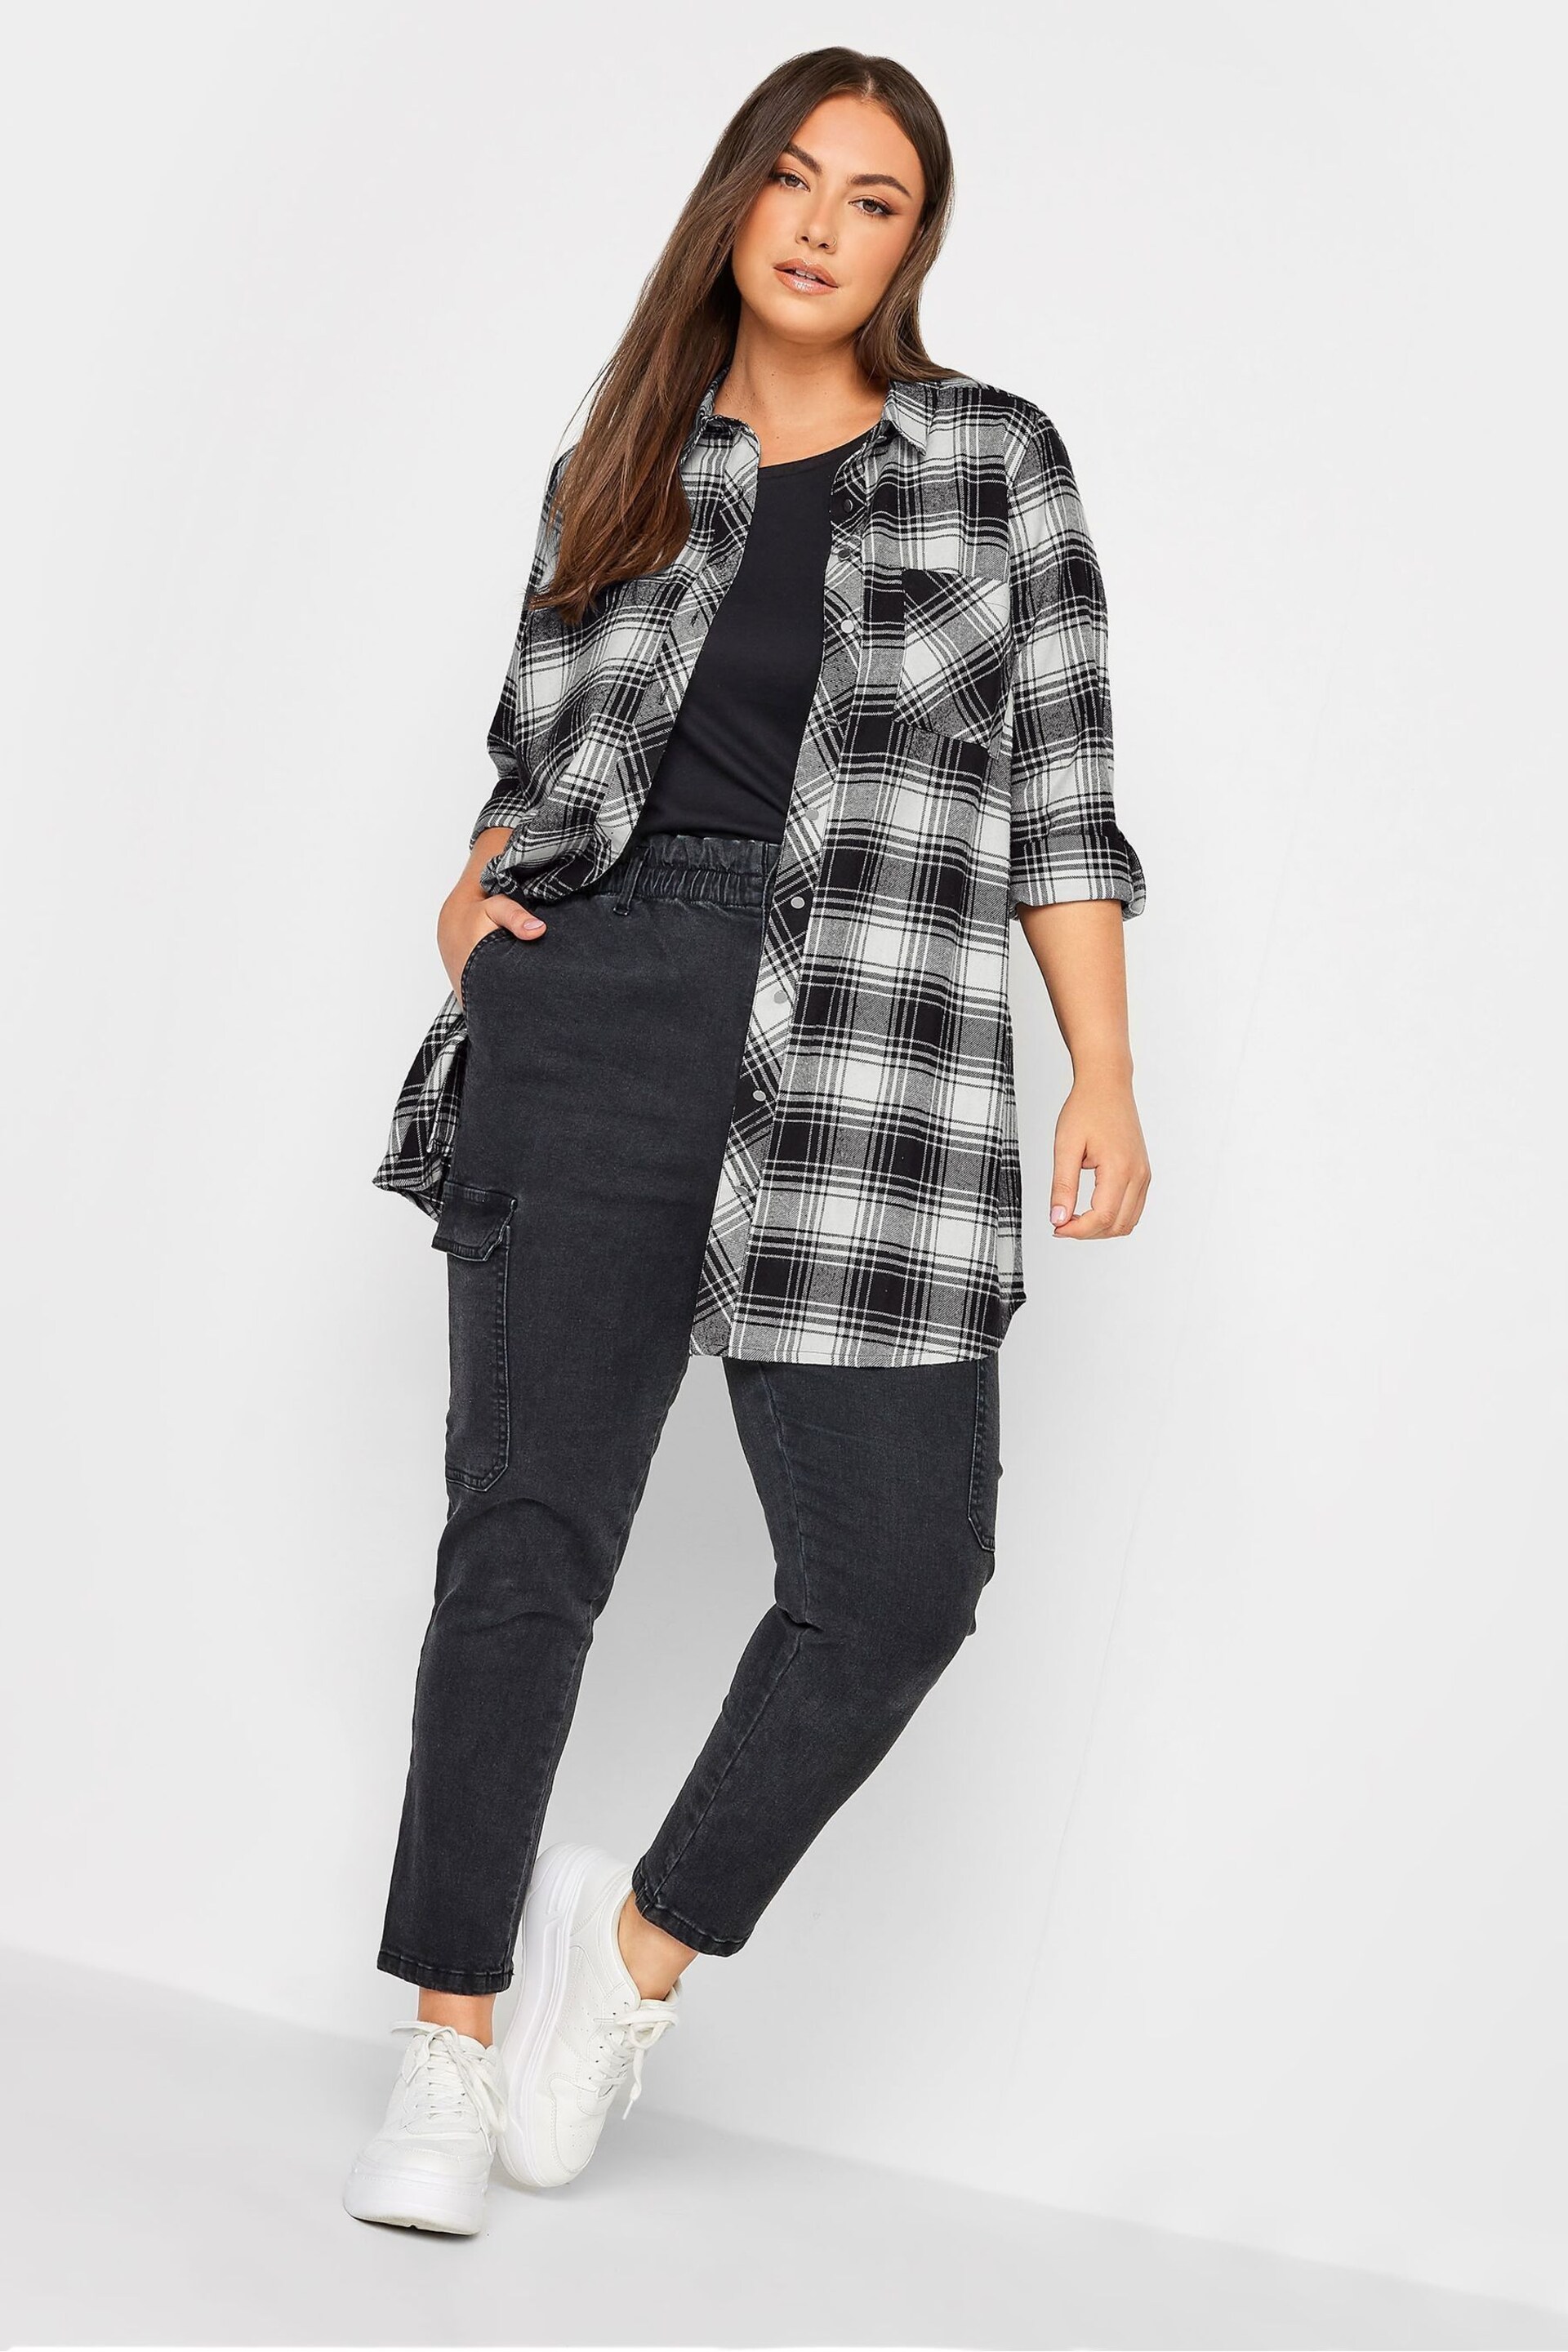 Yours Curve Black/White Check Brushed Boyfriend Shirt - Image 3 of 5